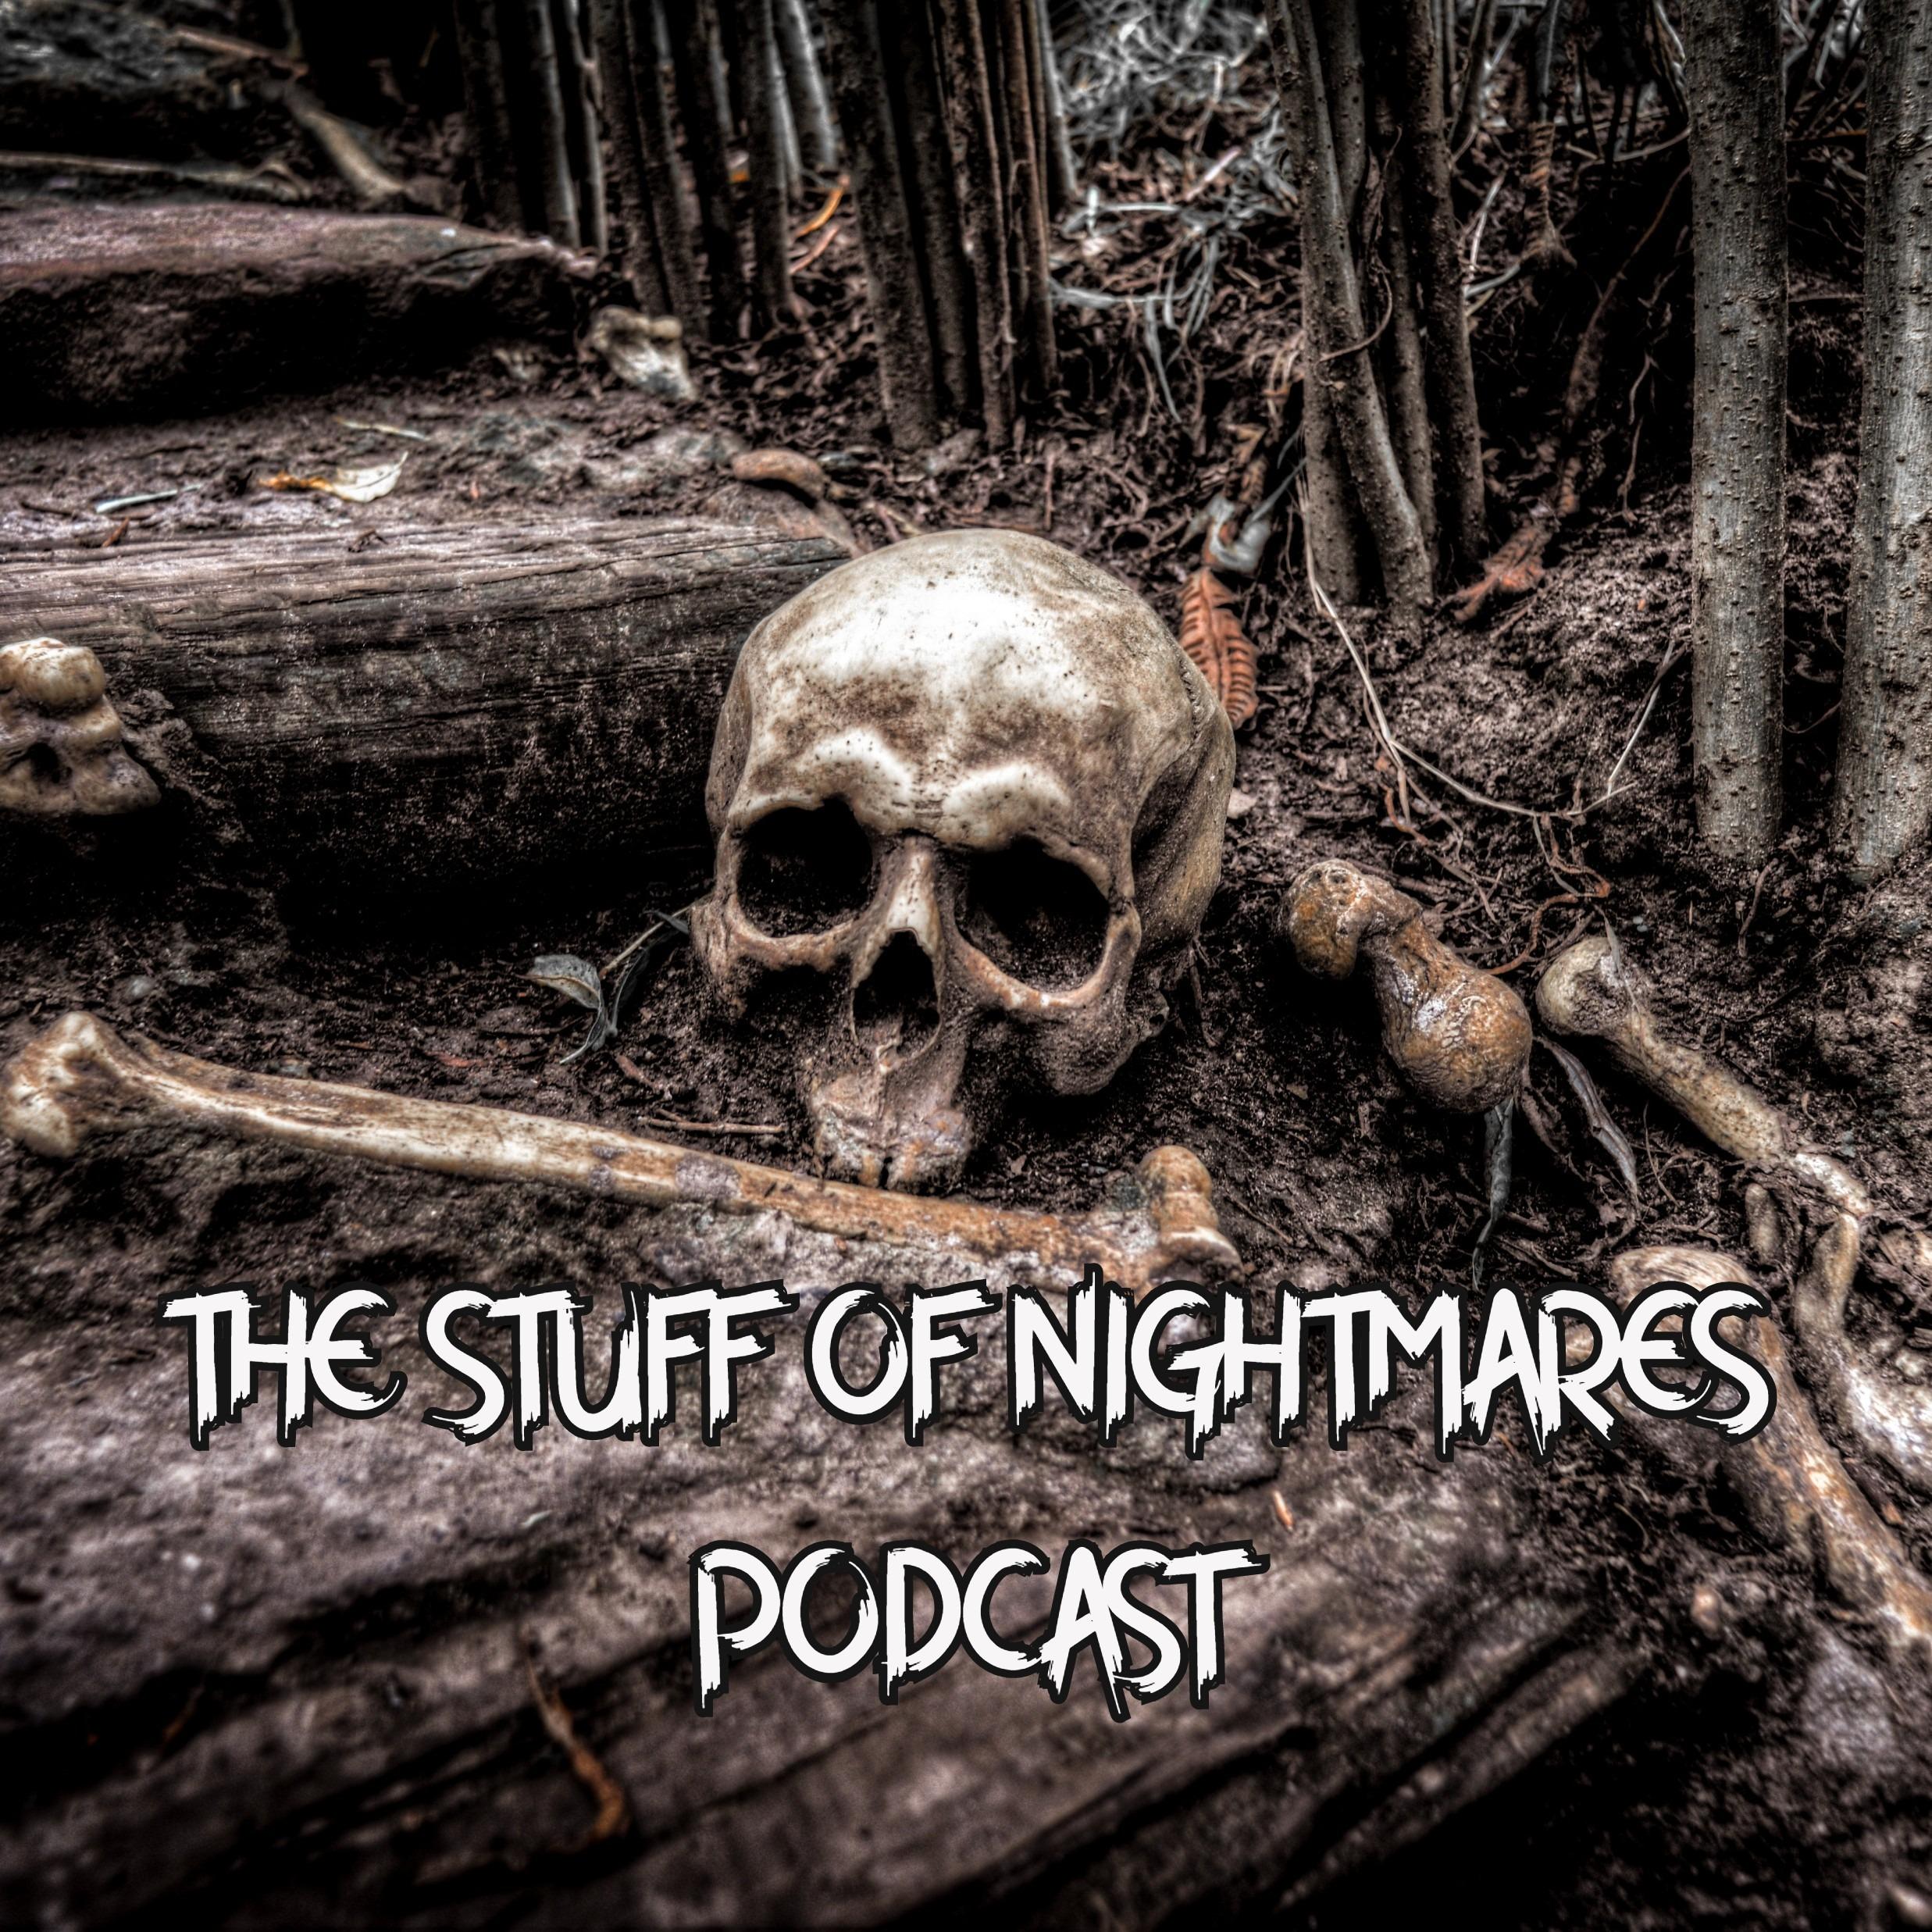 The Stuff of Nightmares Podcast